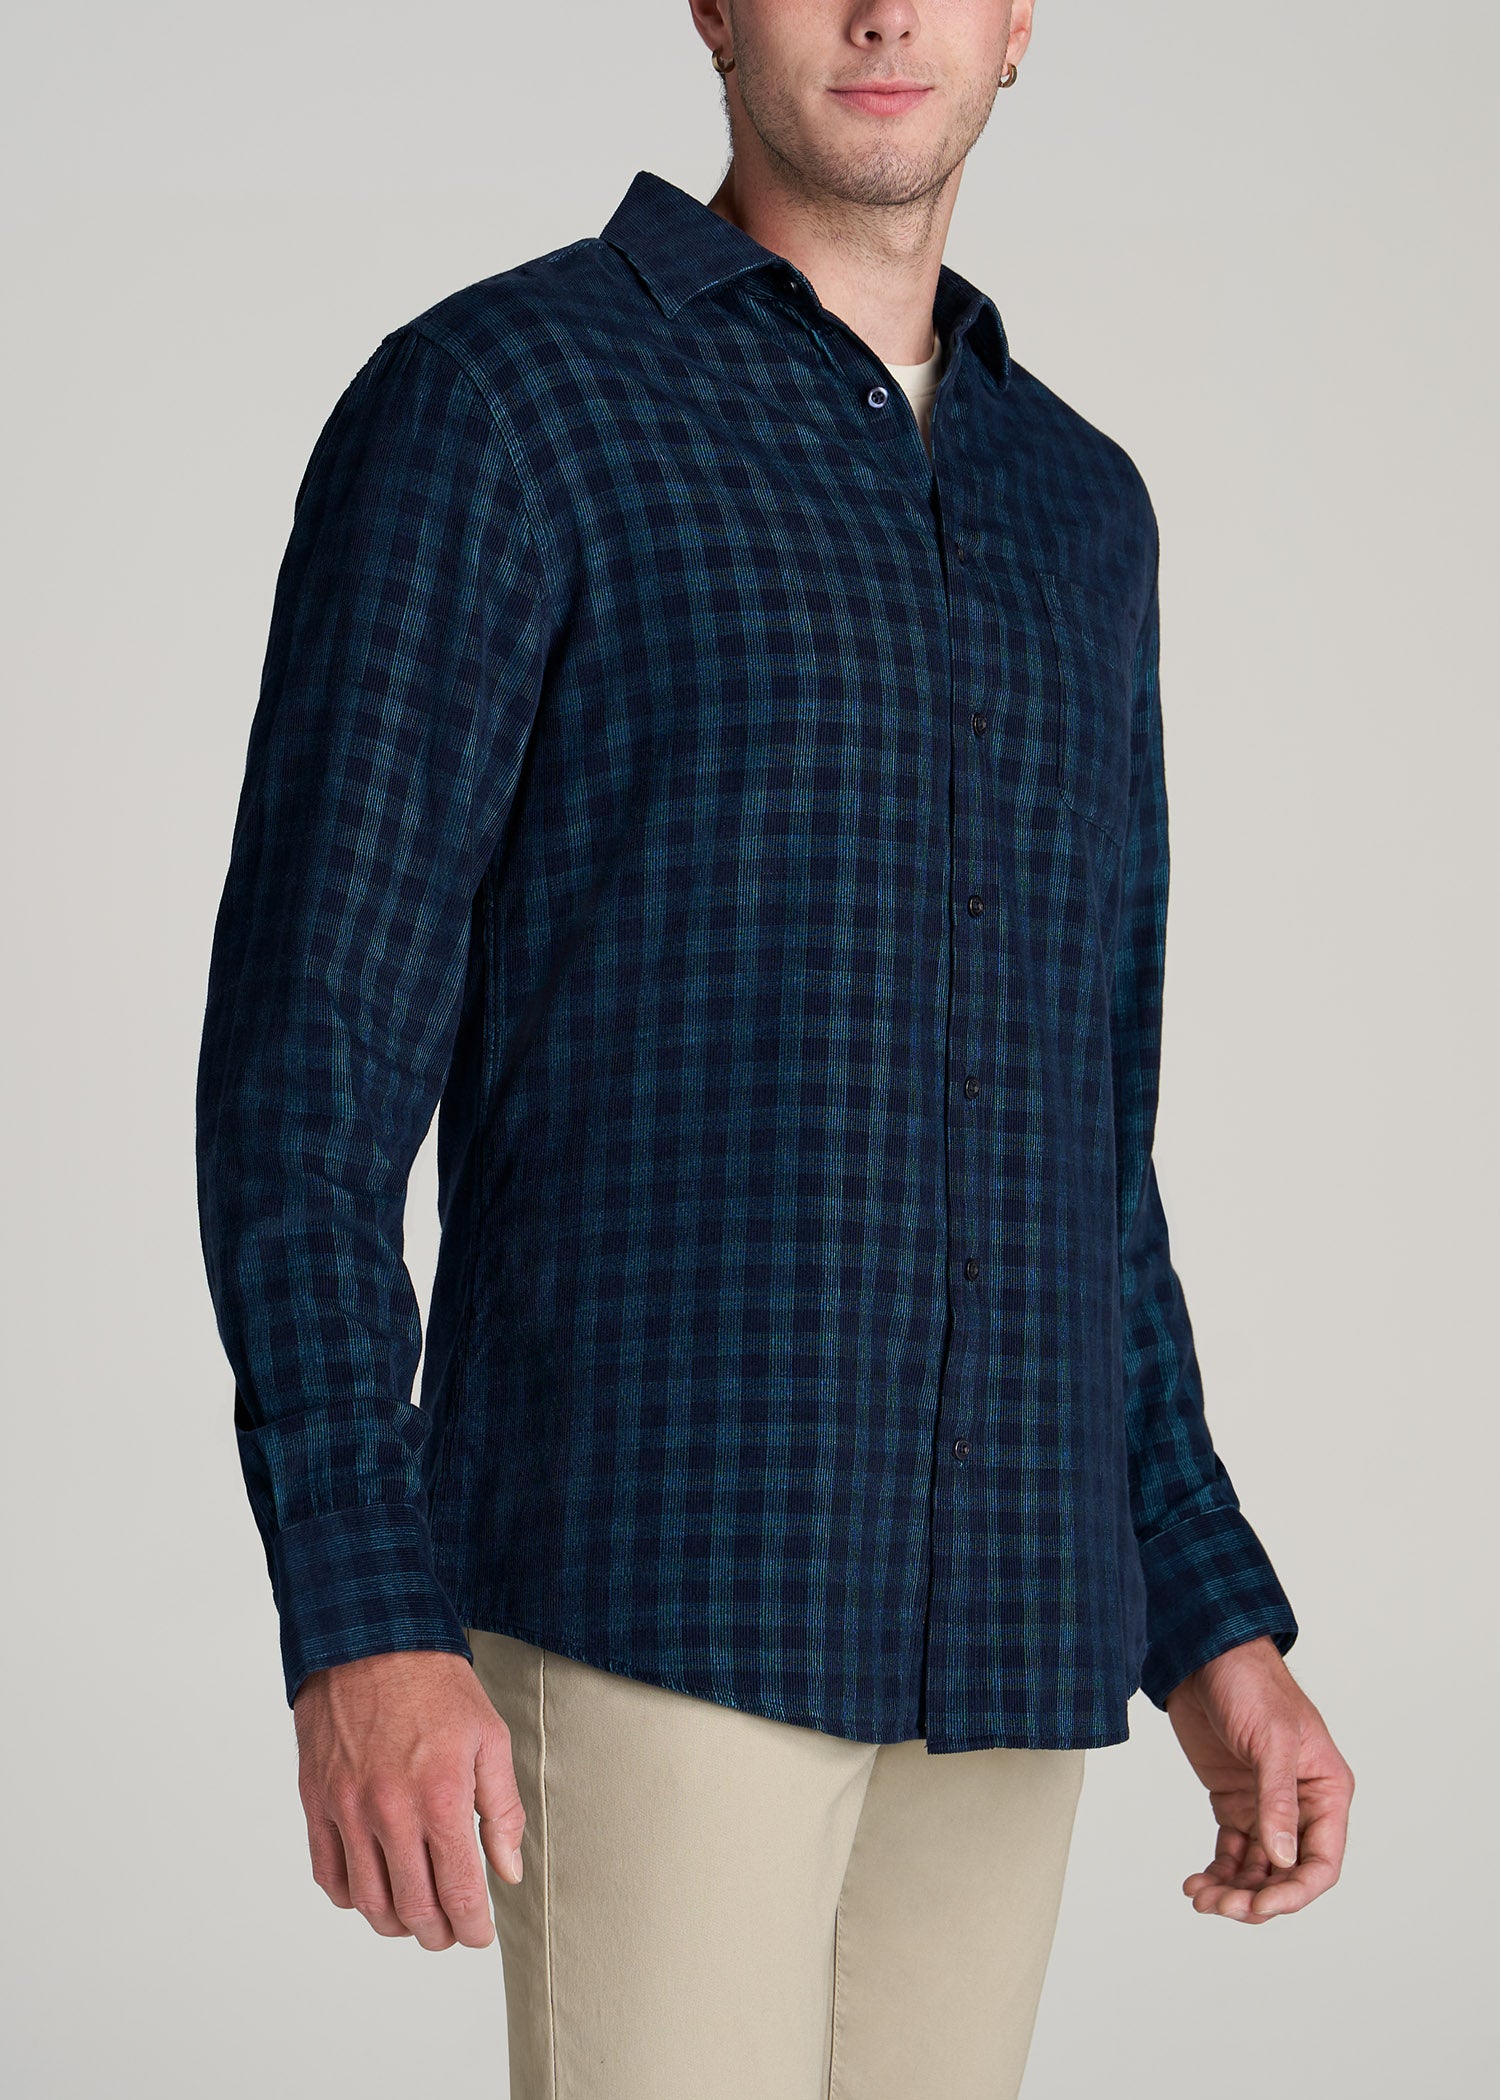    American-Tall-Men-Baby-Wale-Corduroy-Button-Shirt-Teal-Navy-Plaid-side